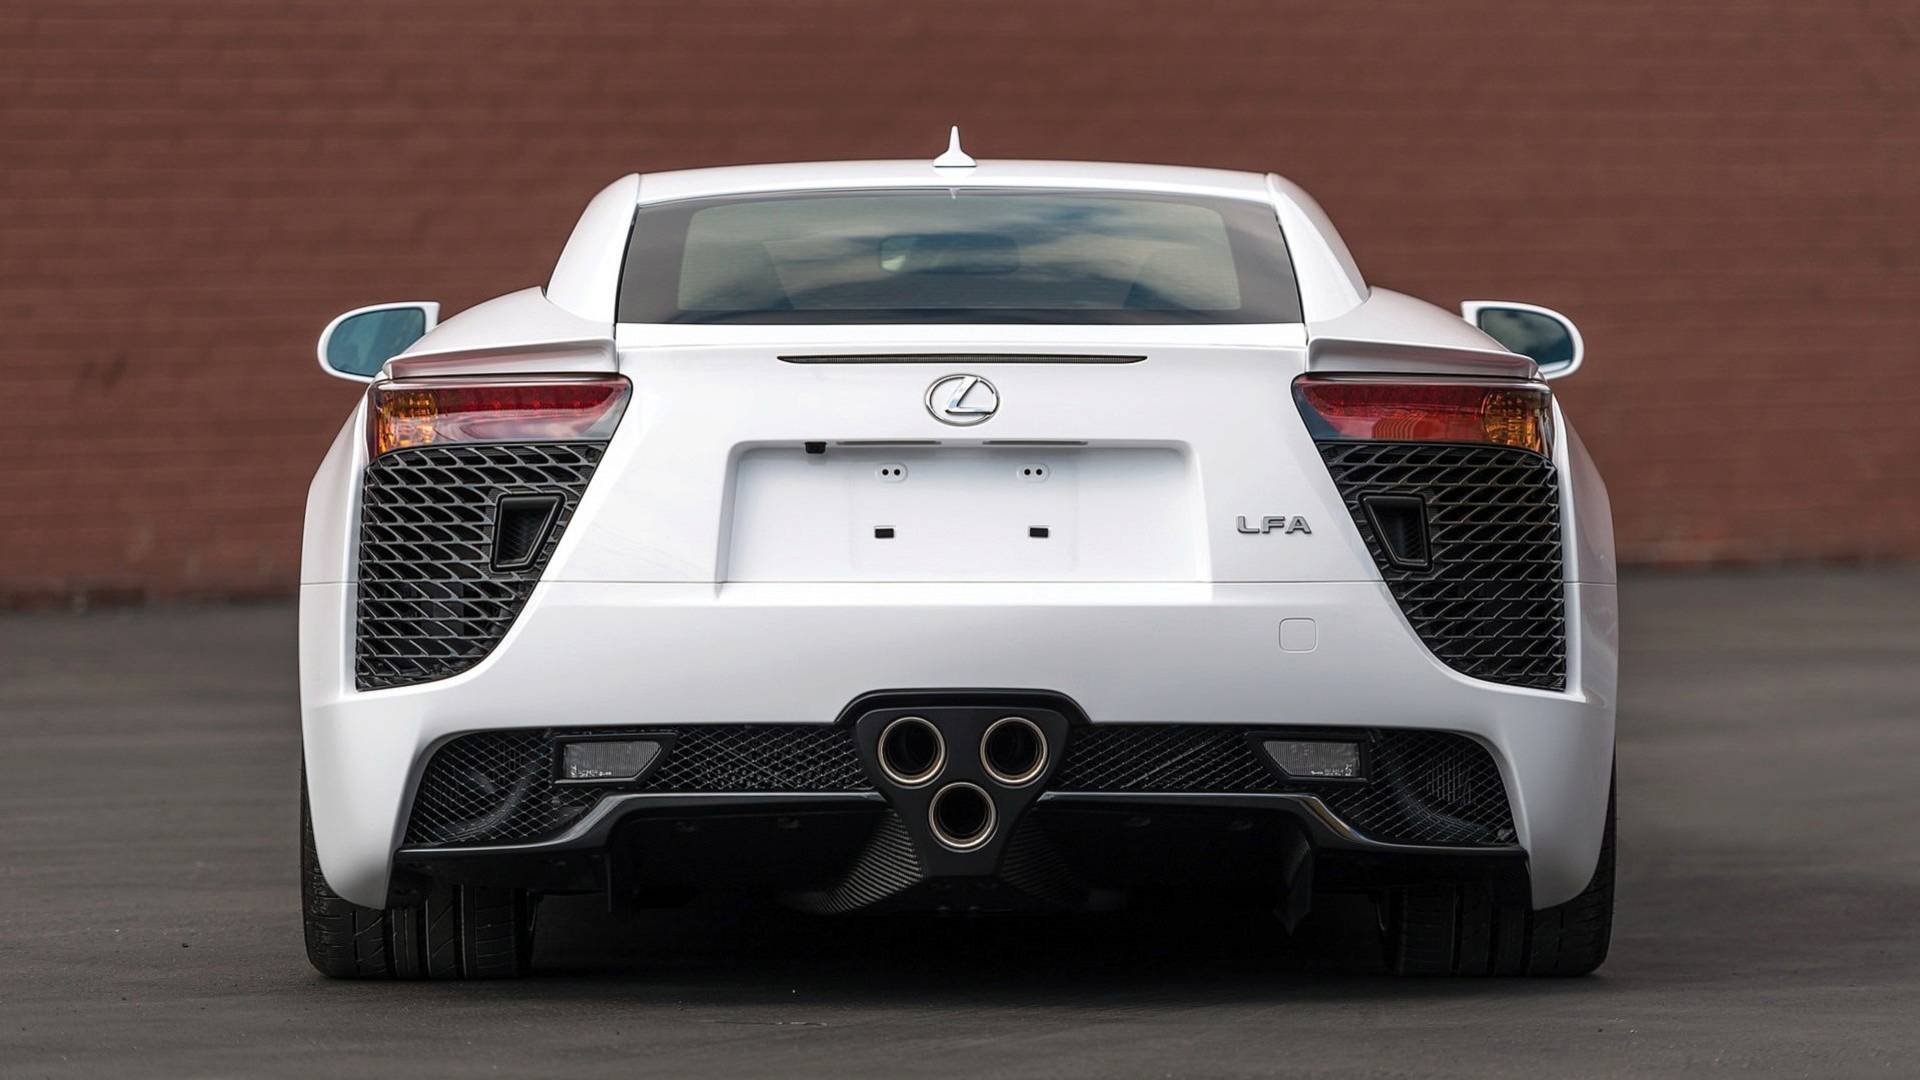 Lexus Lfa To Be Auctioned At Pebble Beach This Month Lexus